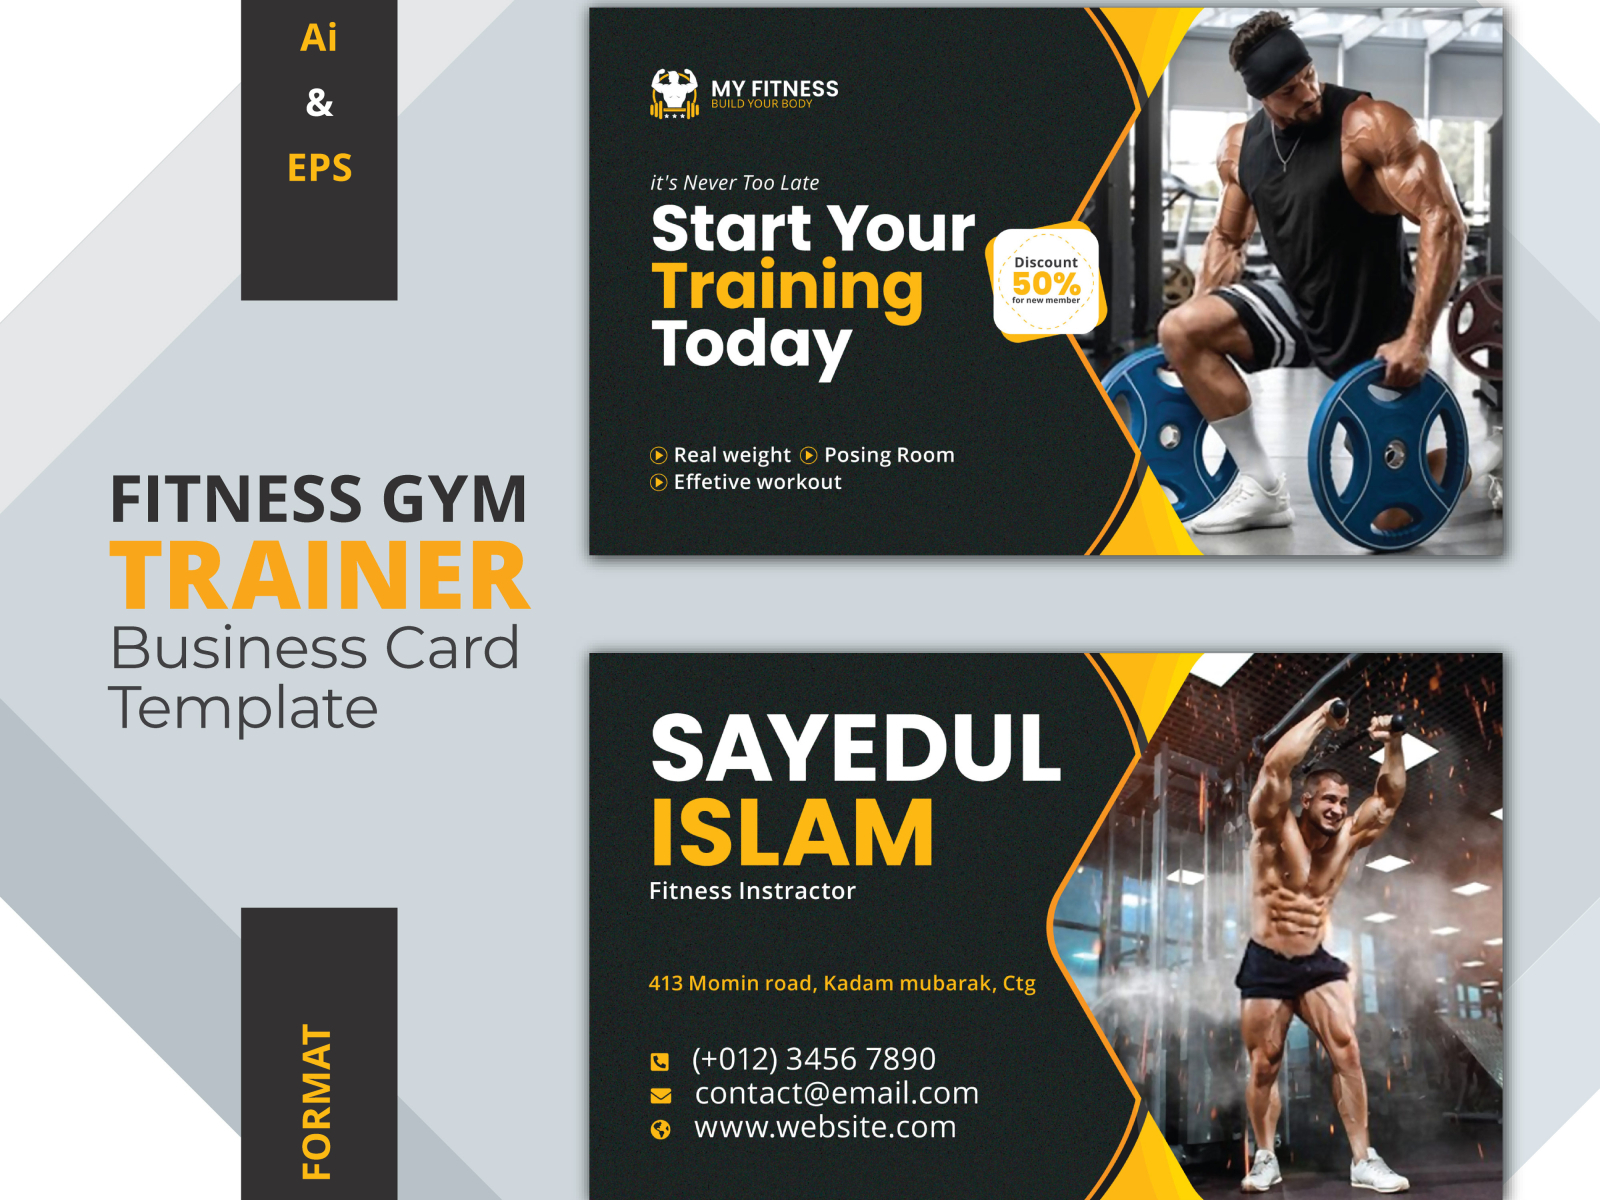 fitness-gym-trainer-business-card-template-by-visualgraphics-on-dribbble